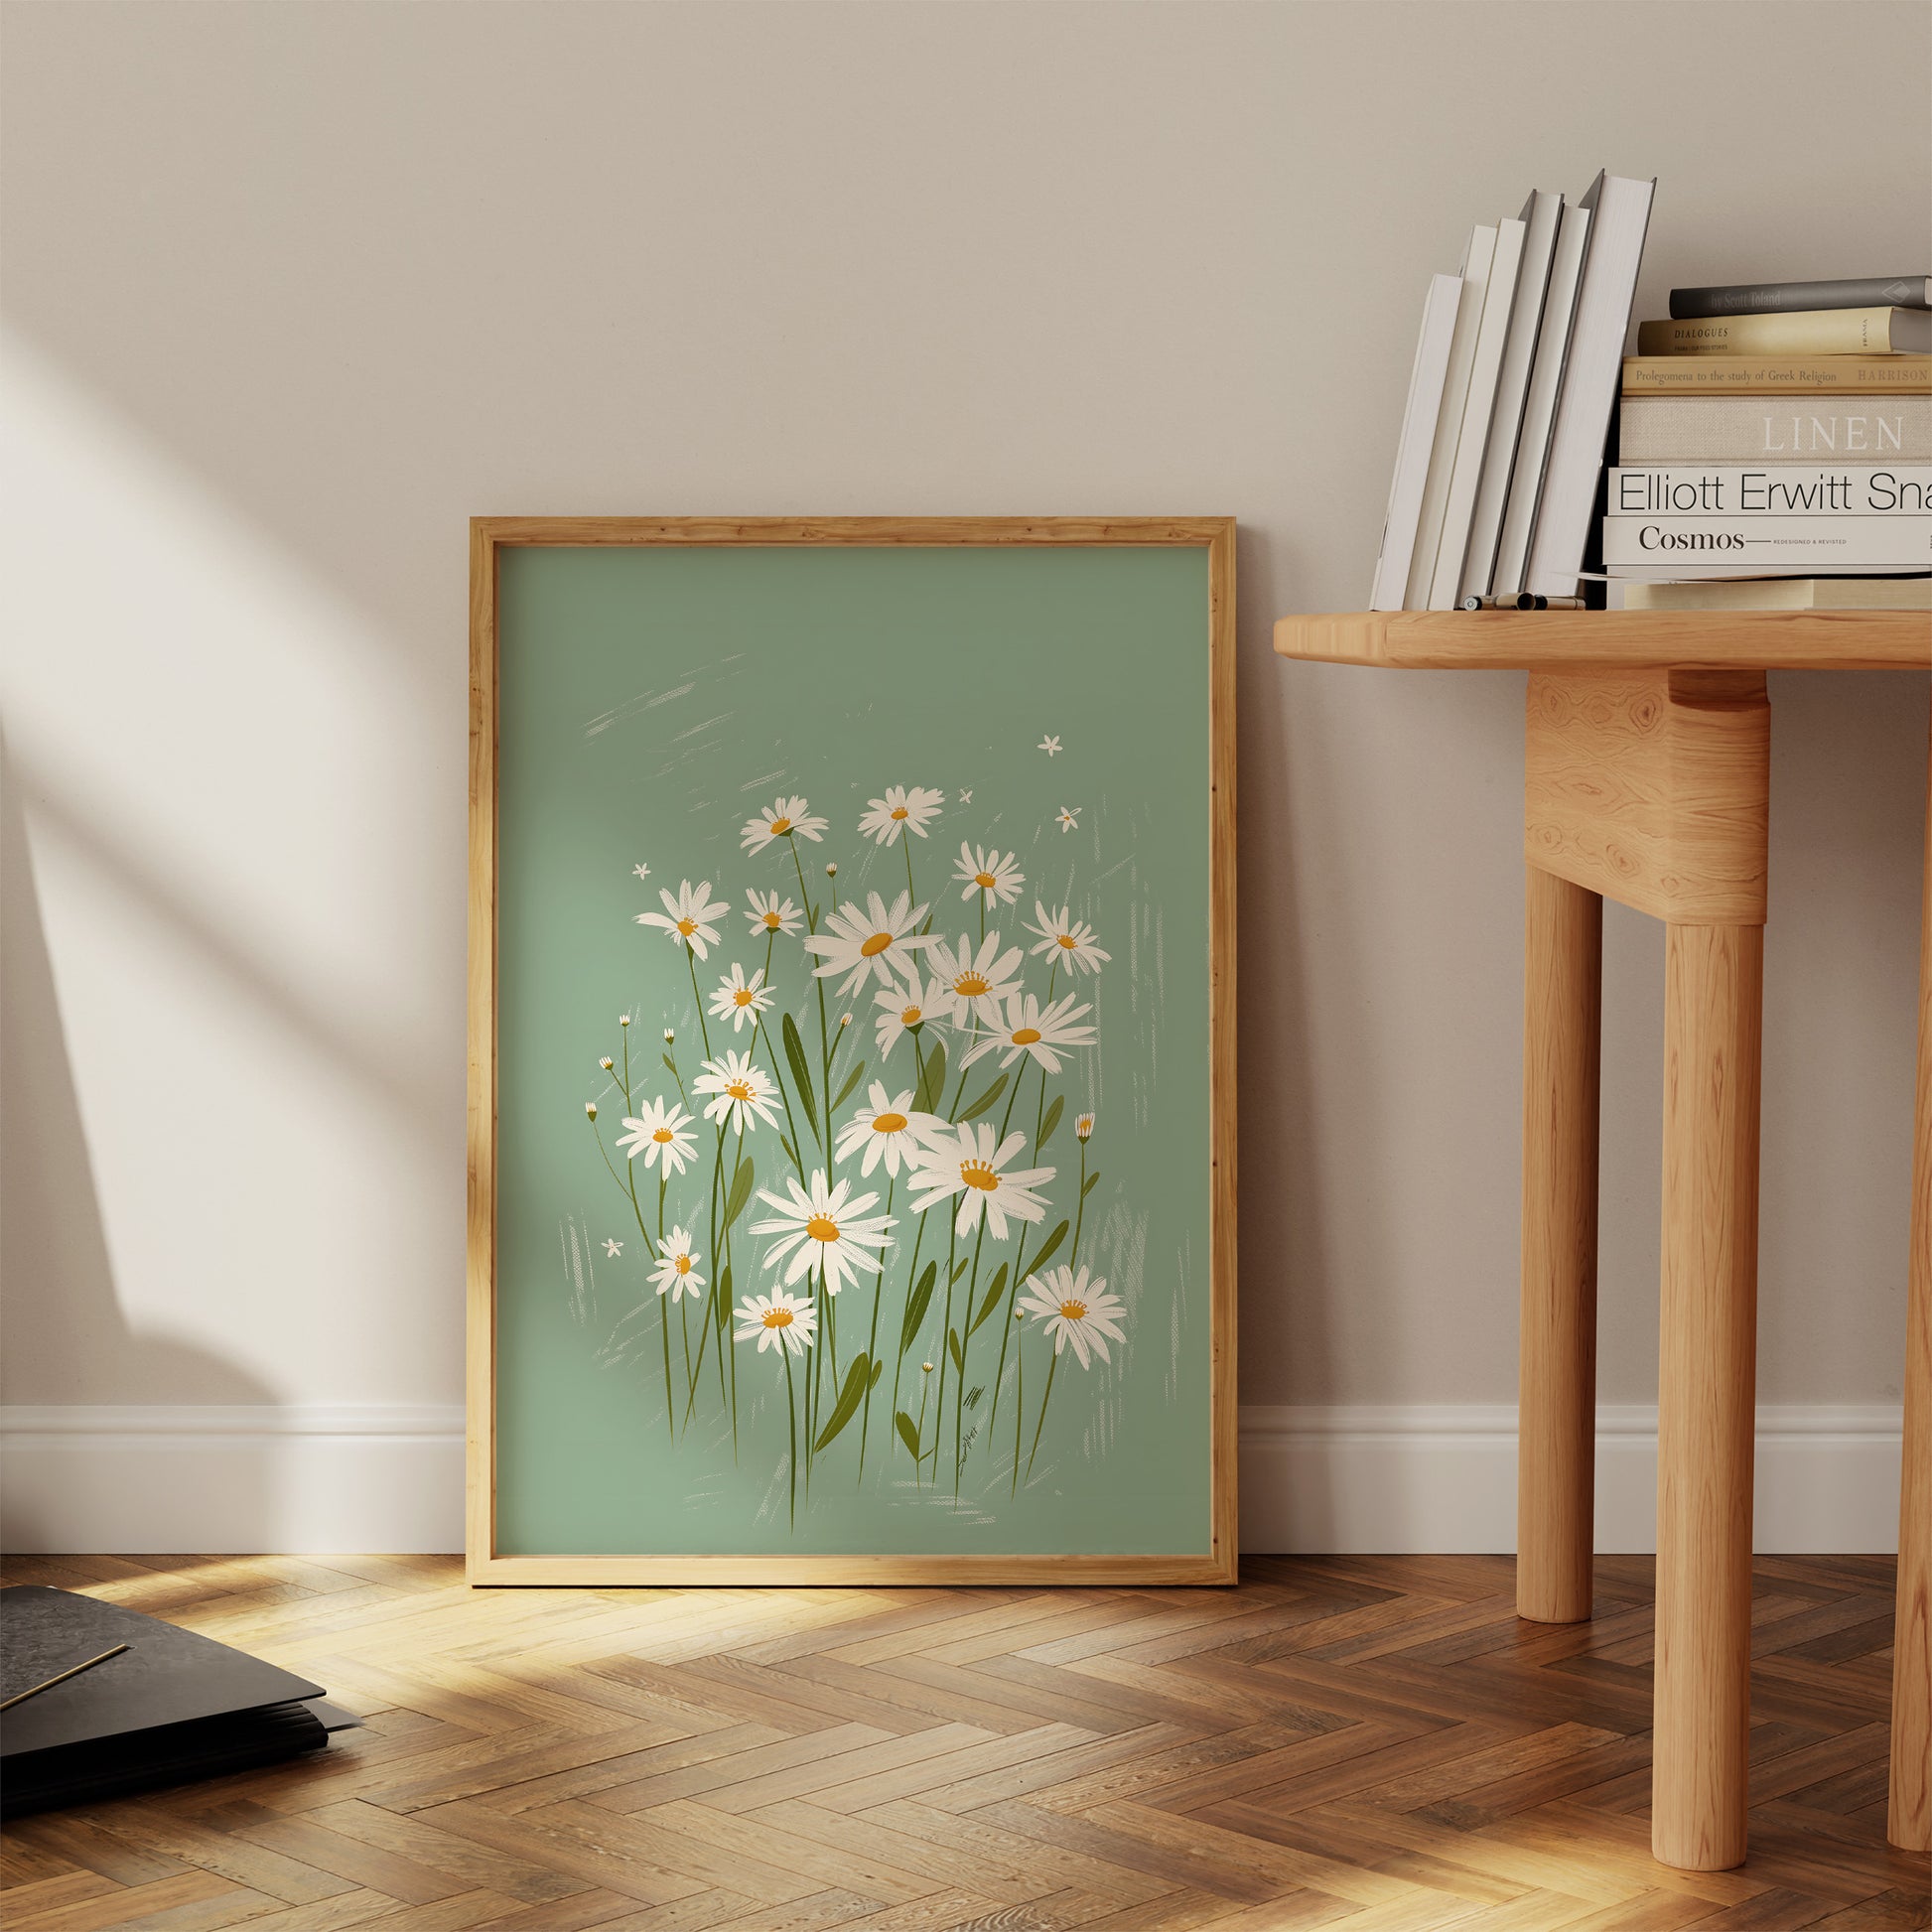 A framed painting of daisies leaning against a wall beside a wooden side table.